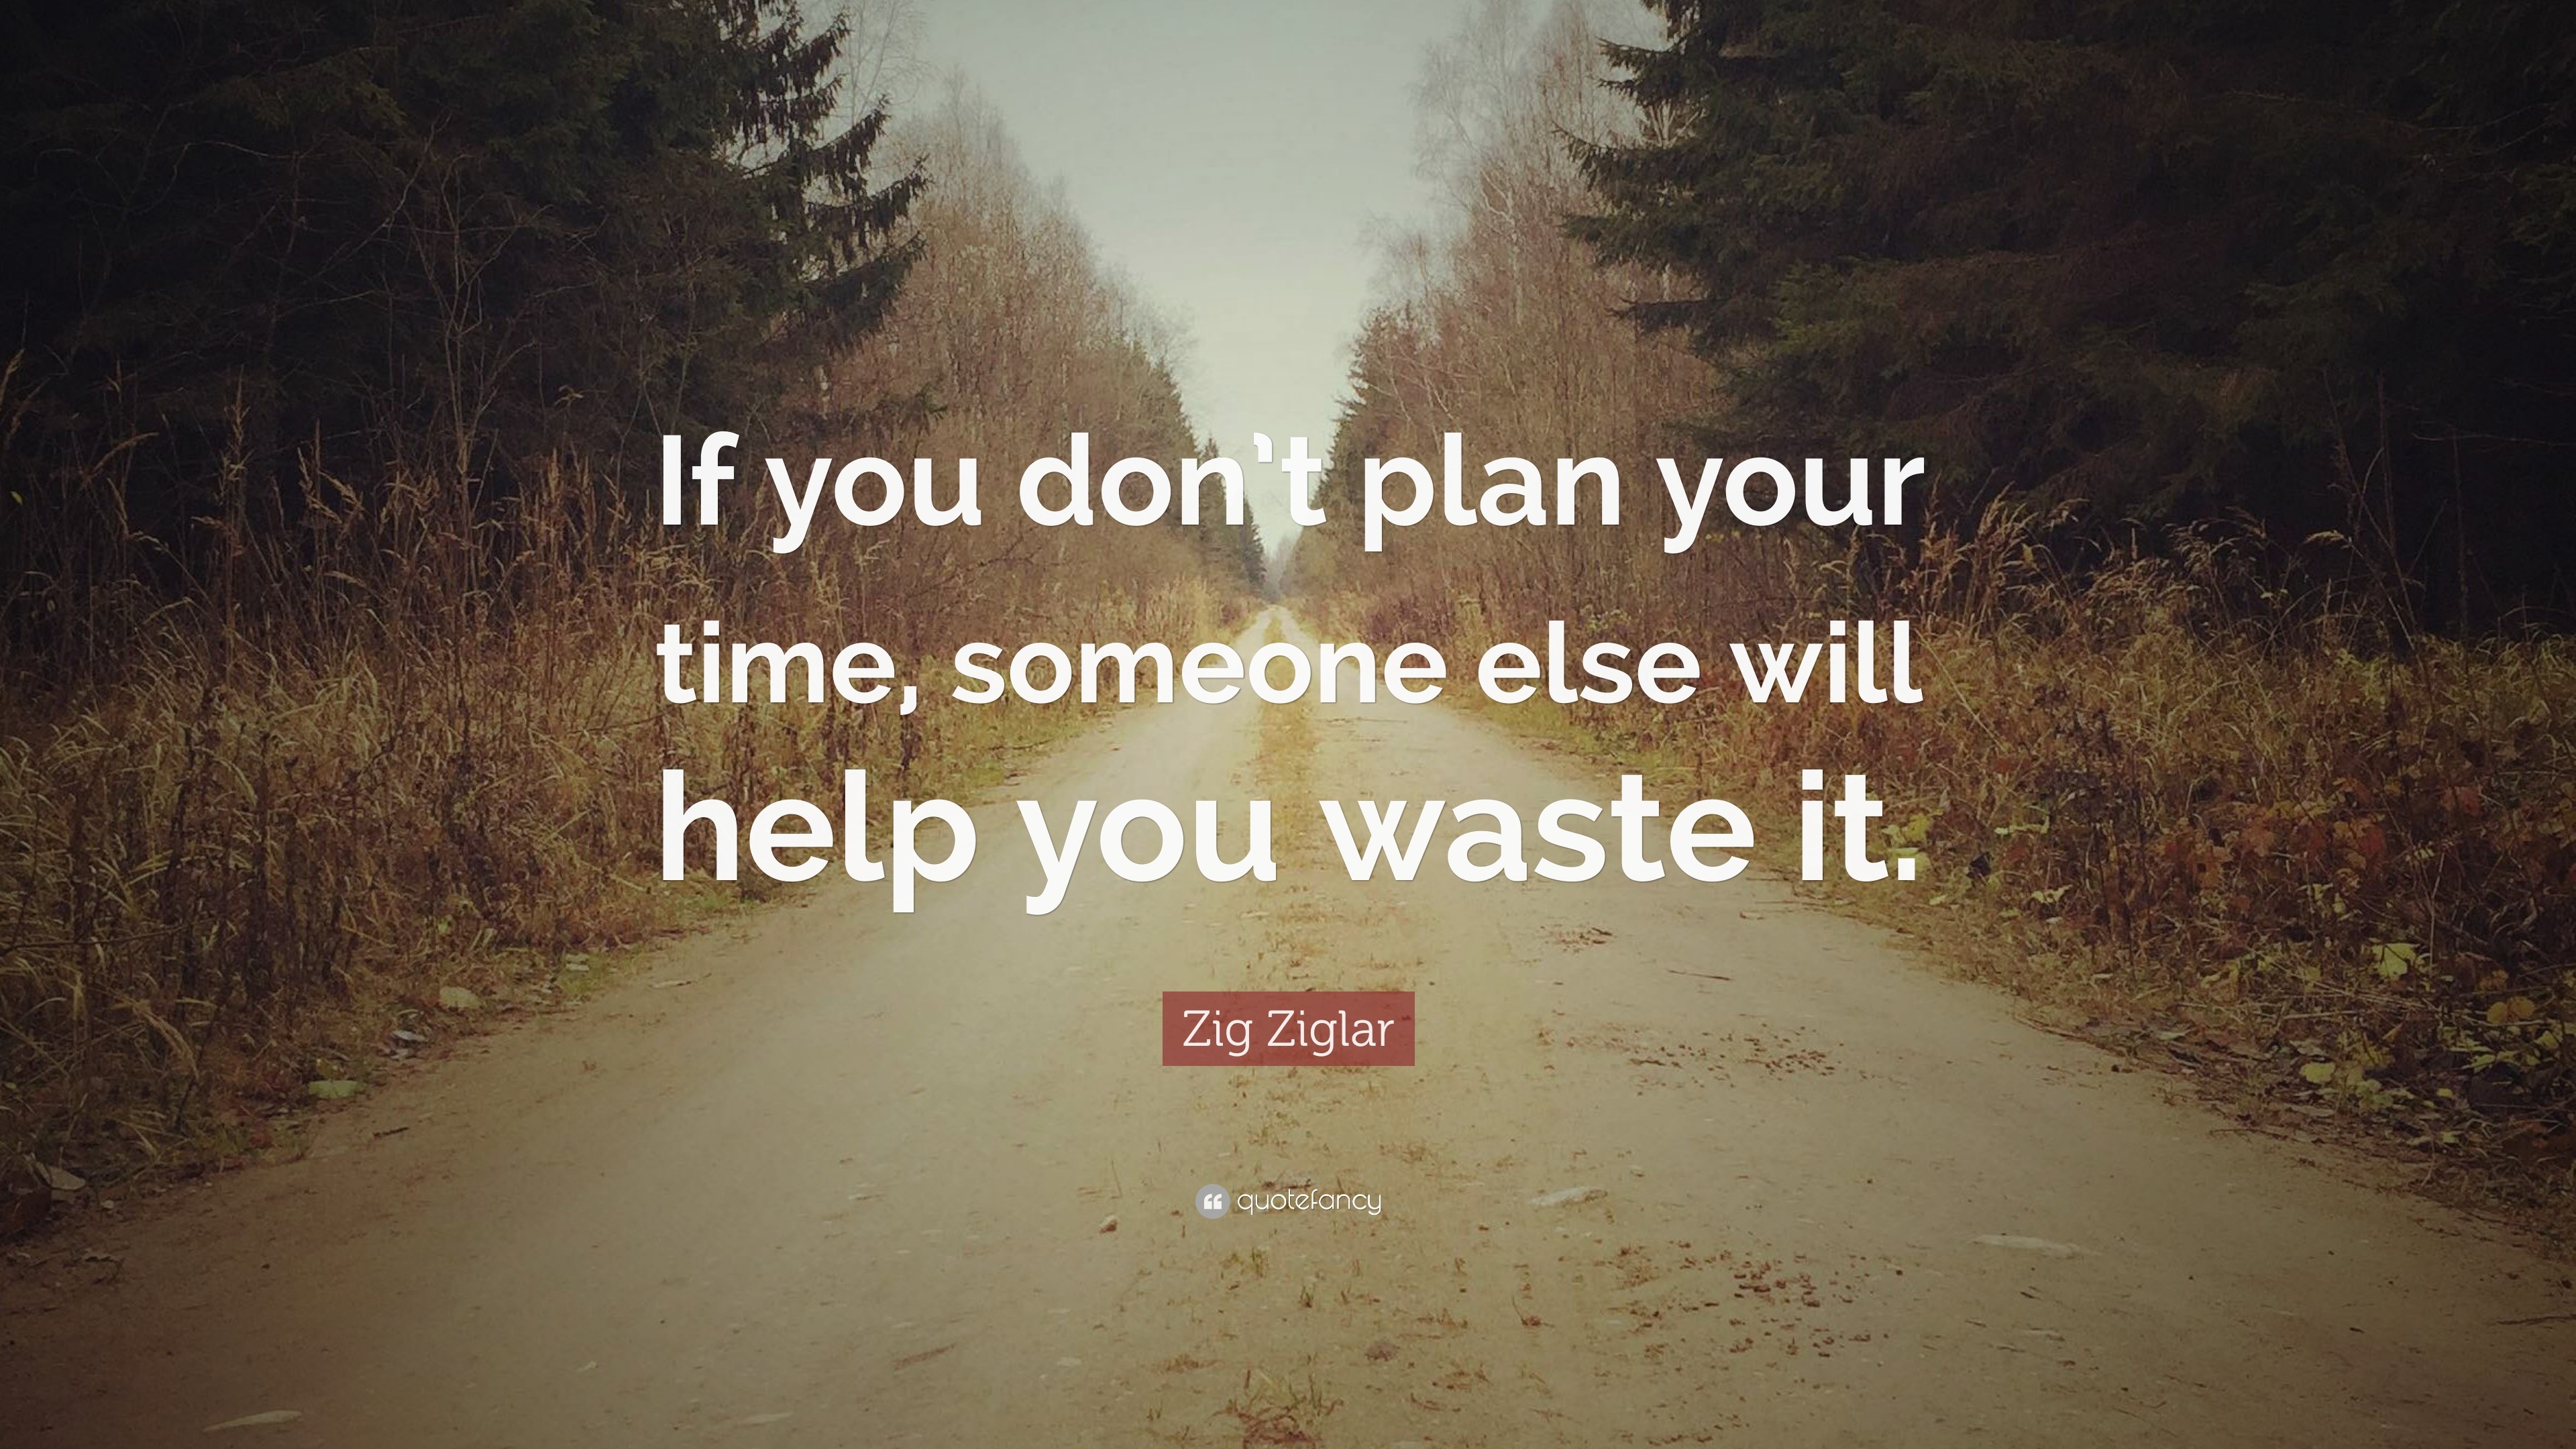 Zig Ziglar quote: If you don't plan your time, someone else will help